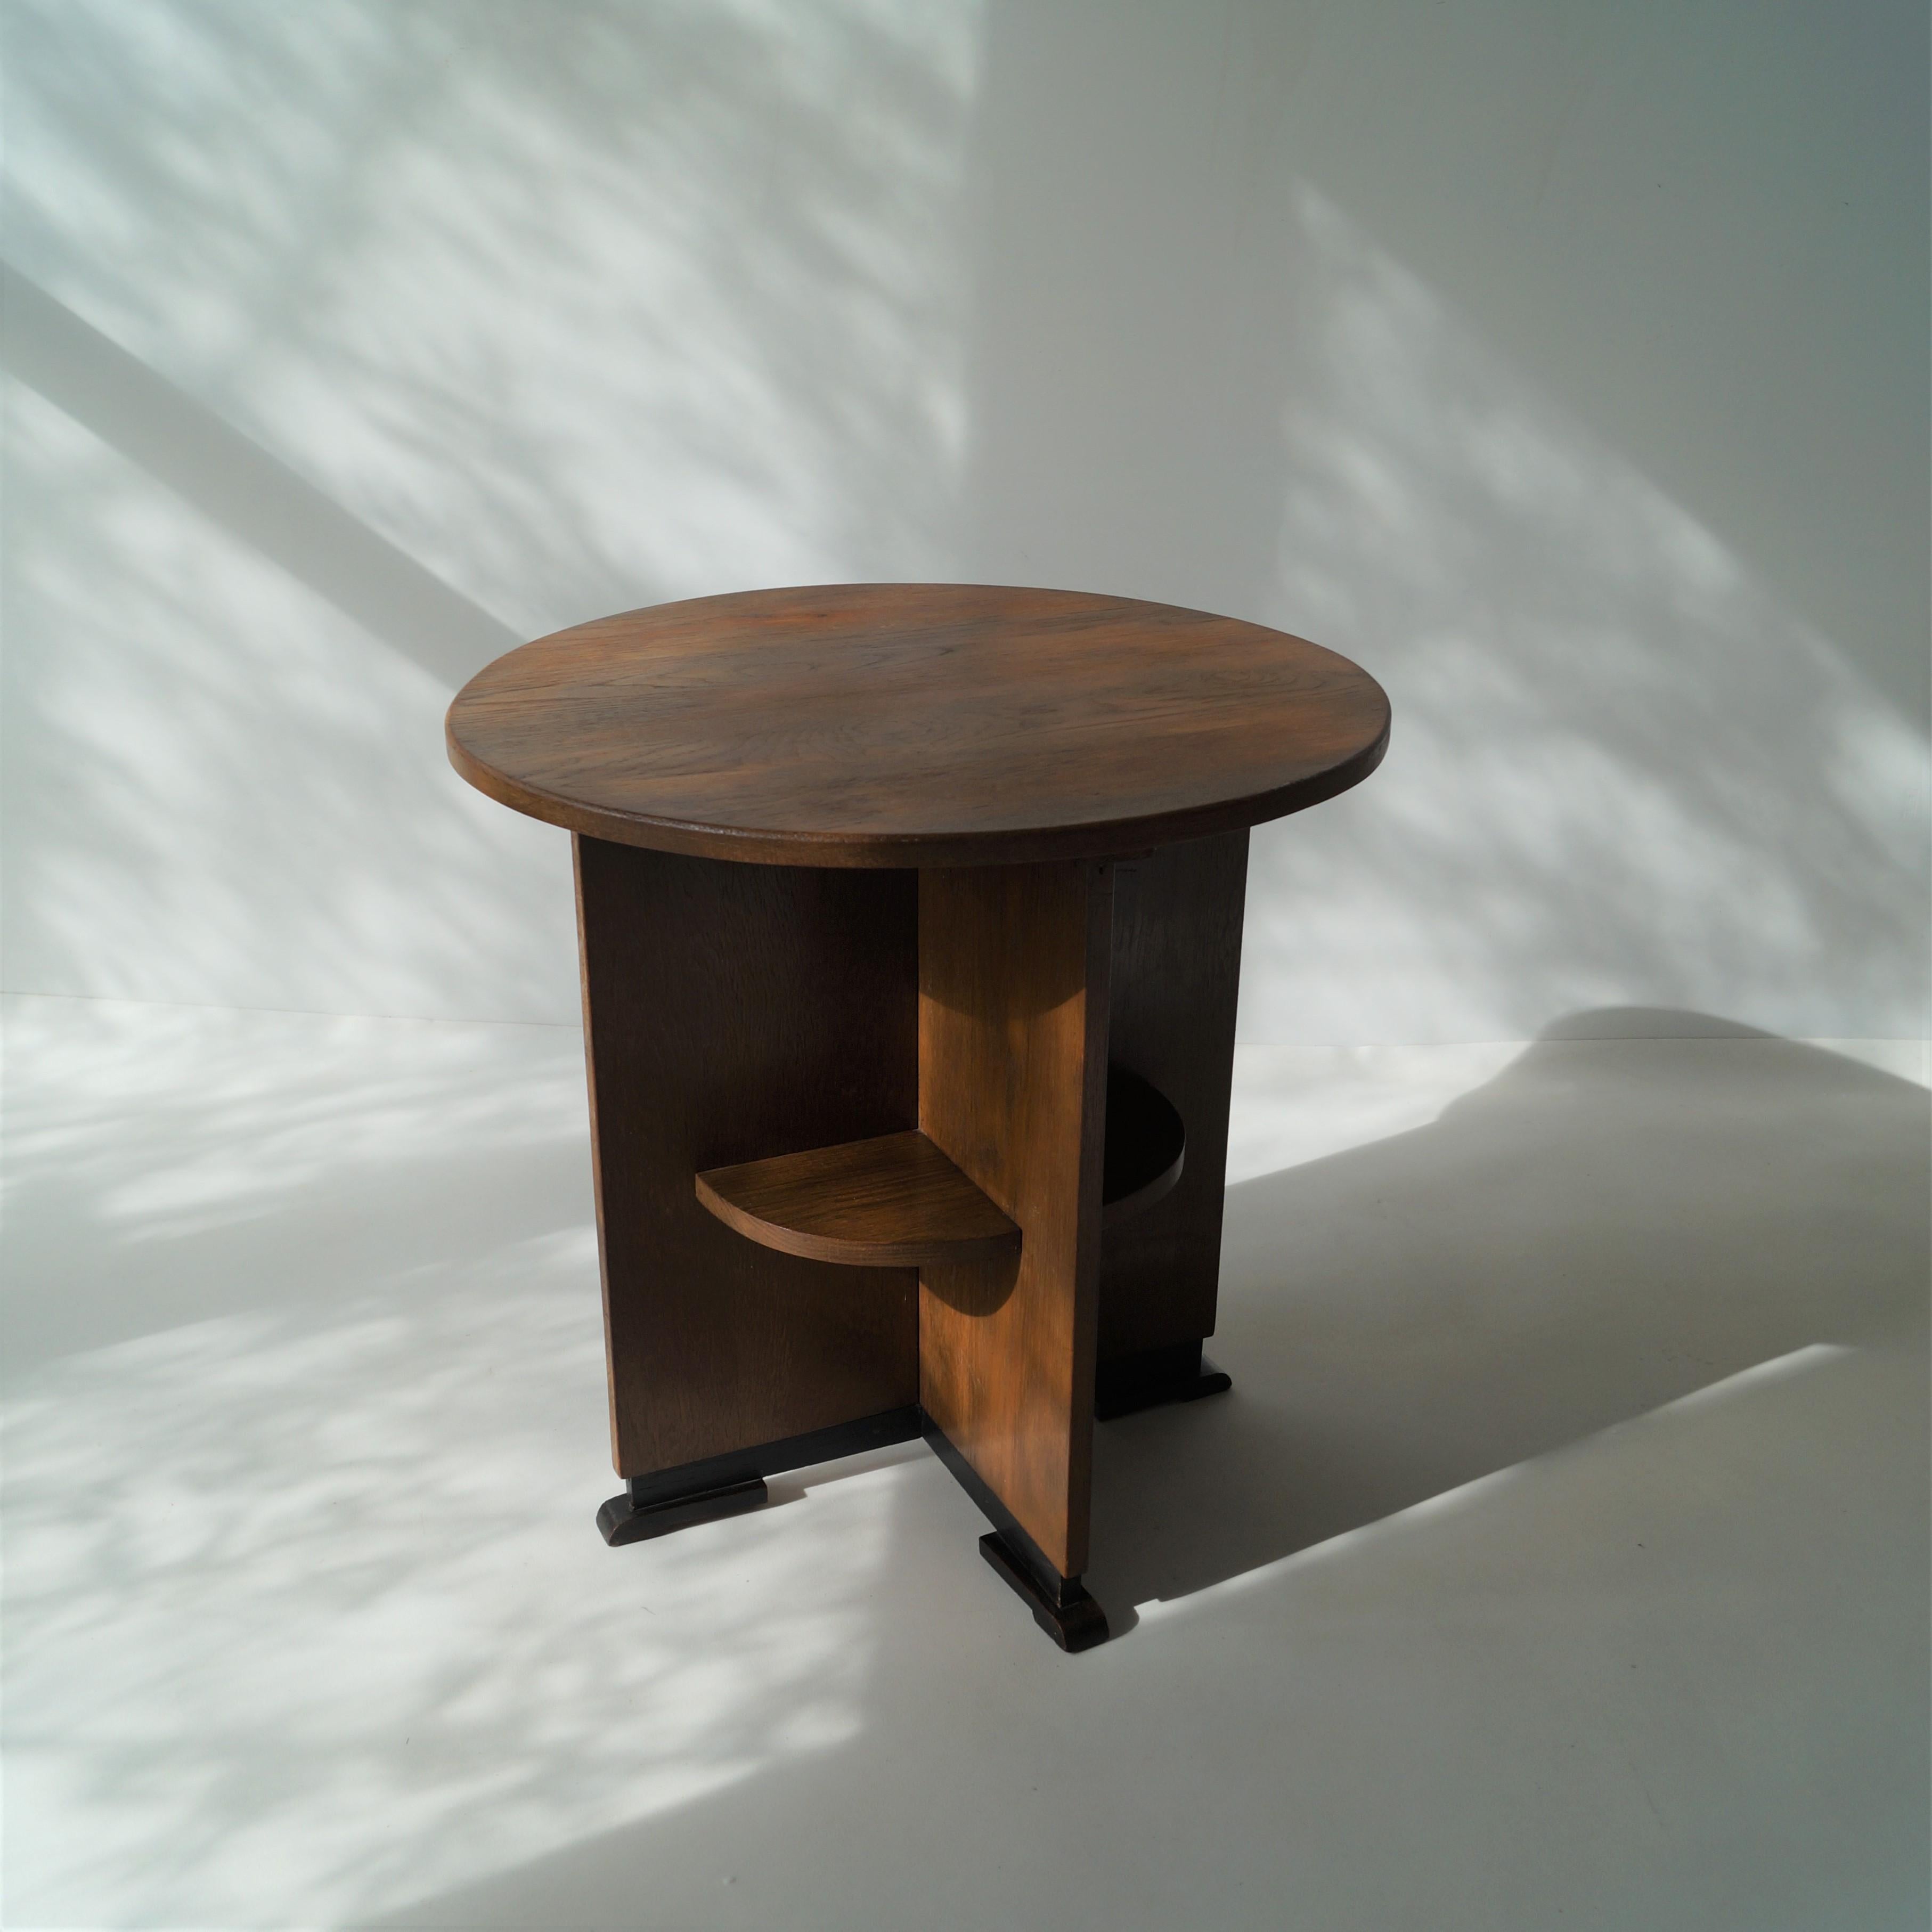 Dutch Art Deco (Haagse School) Occasional Table with Modernist Lines, 1920s 7